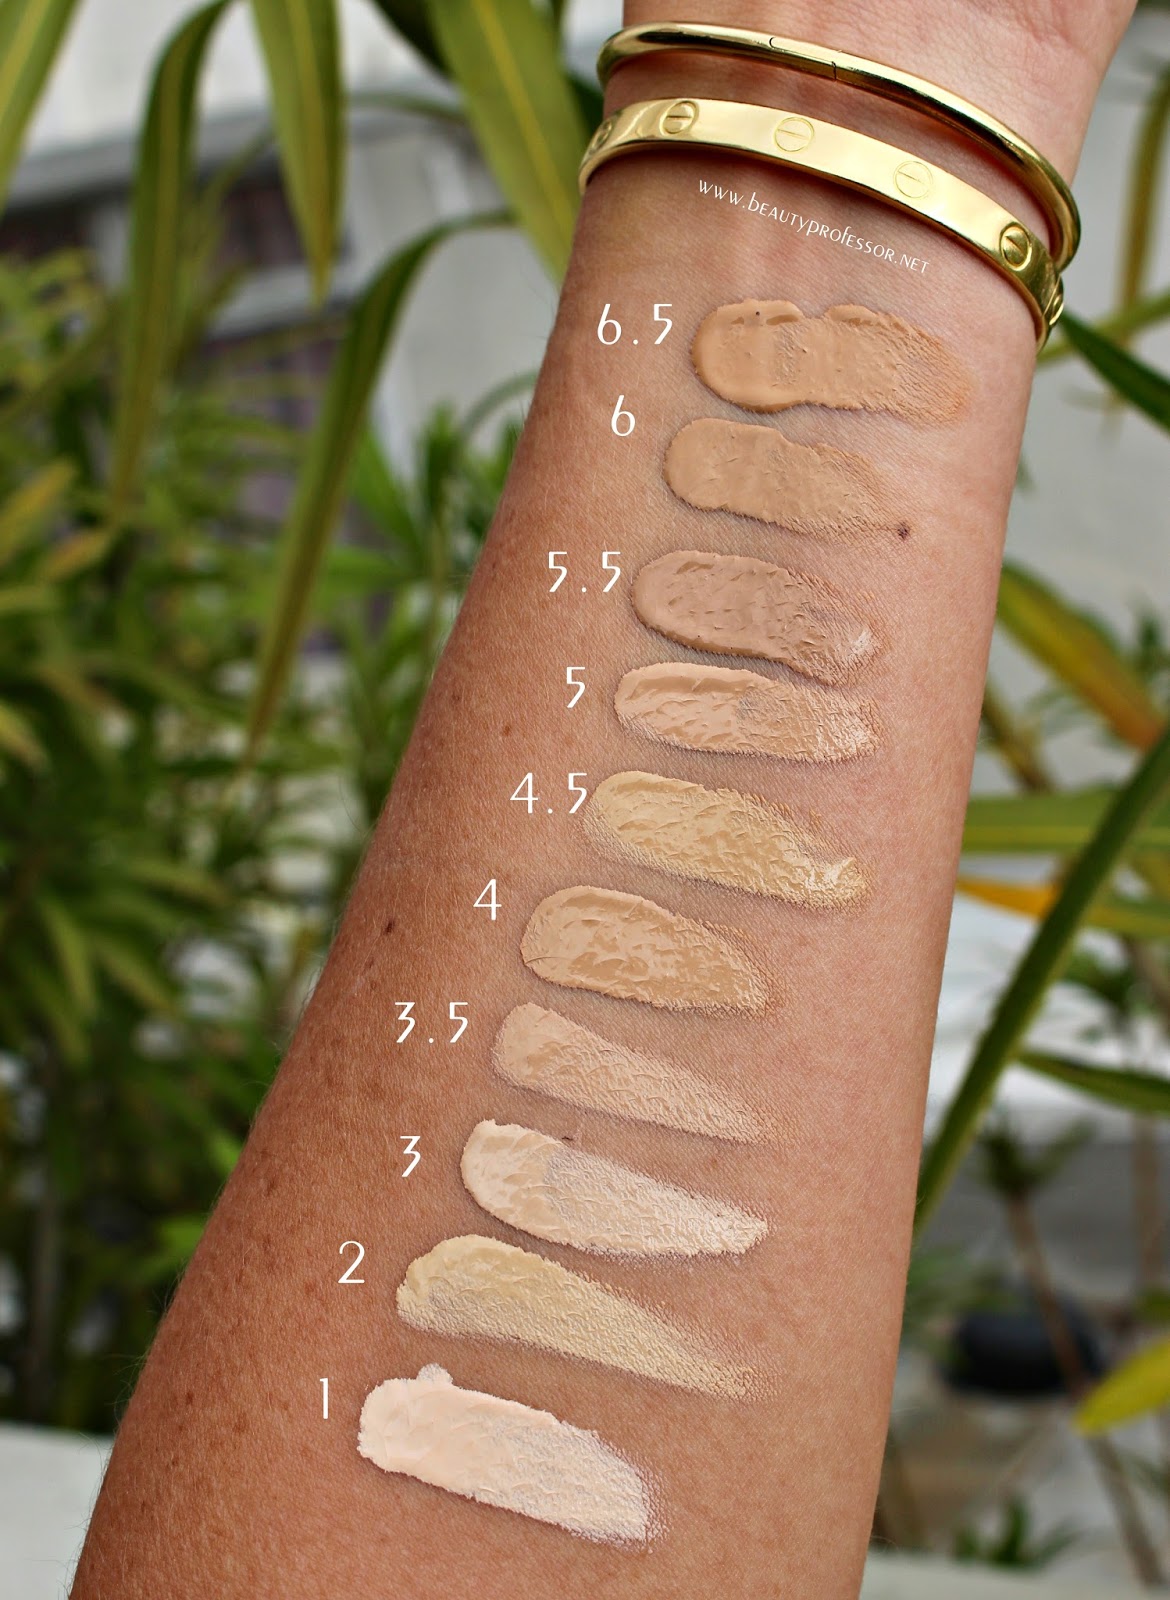 armani power fabric concealer swatches